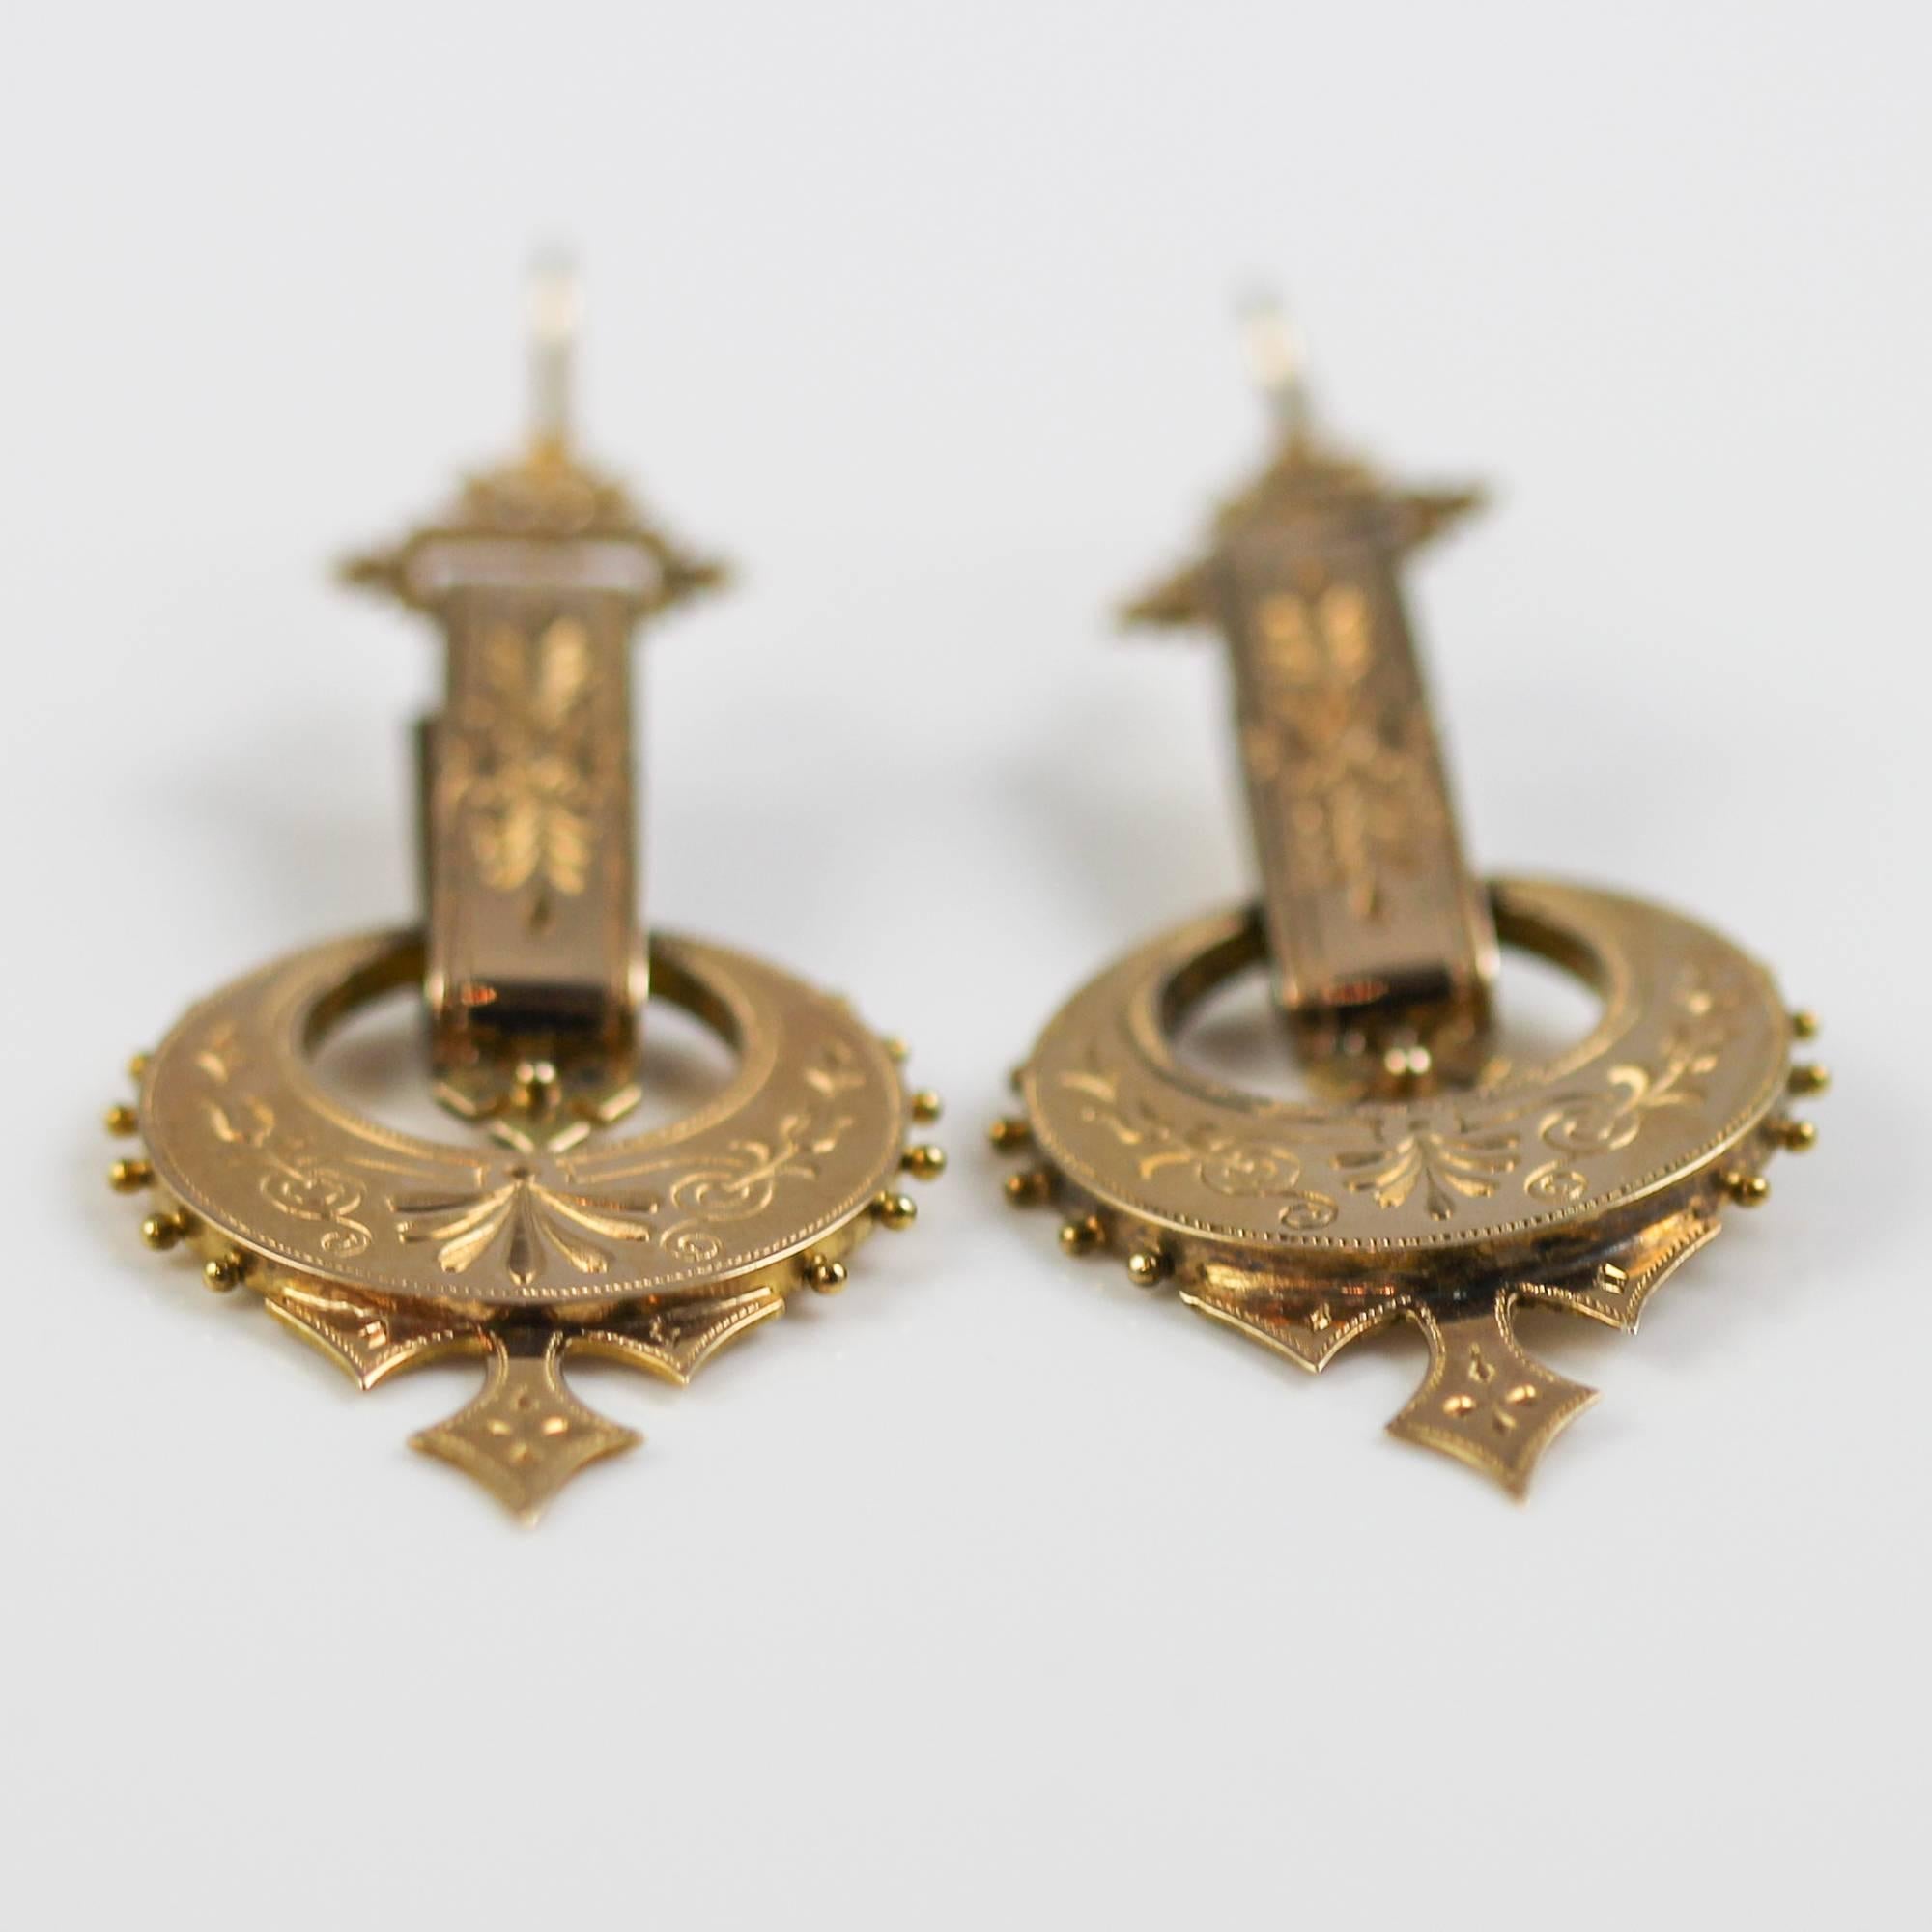 These beautiful Victorian earrings feature a beautiful design combining gothic styles with that of Art Nouveau. They are made in 14k yellow gold and decorated with intricate engraving and Etruscan style beading. They are in excellent shape